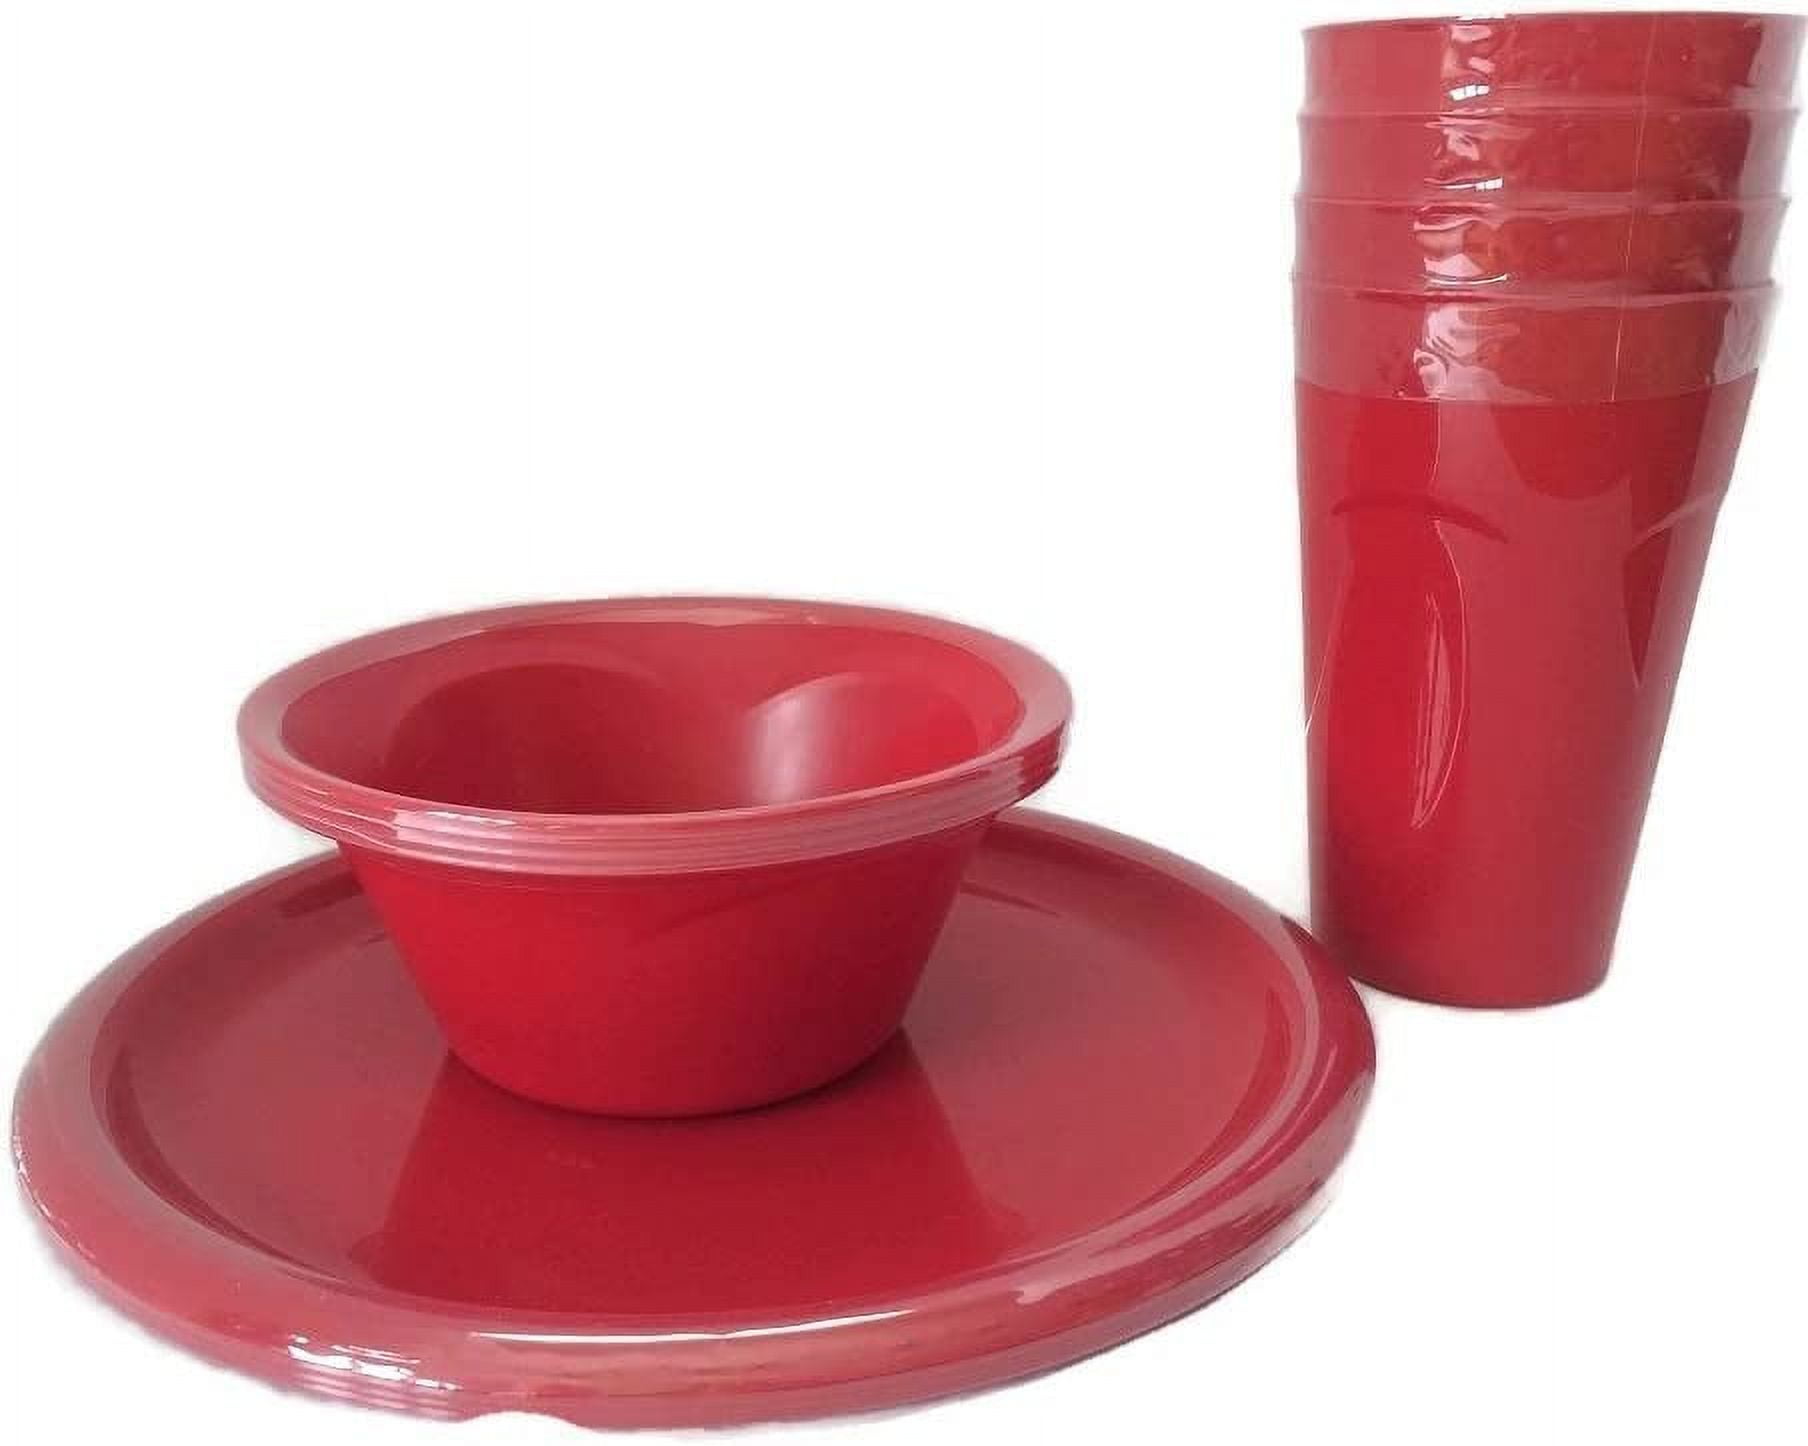  Set of 4 Reusable Melamine Red Plastic Party Cups : Home &  Kitchen